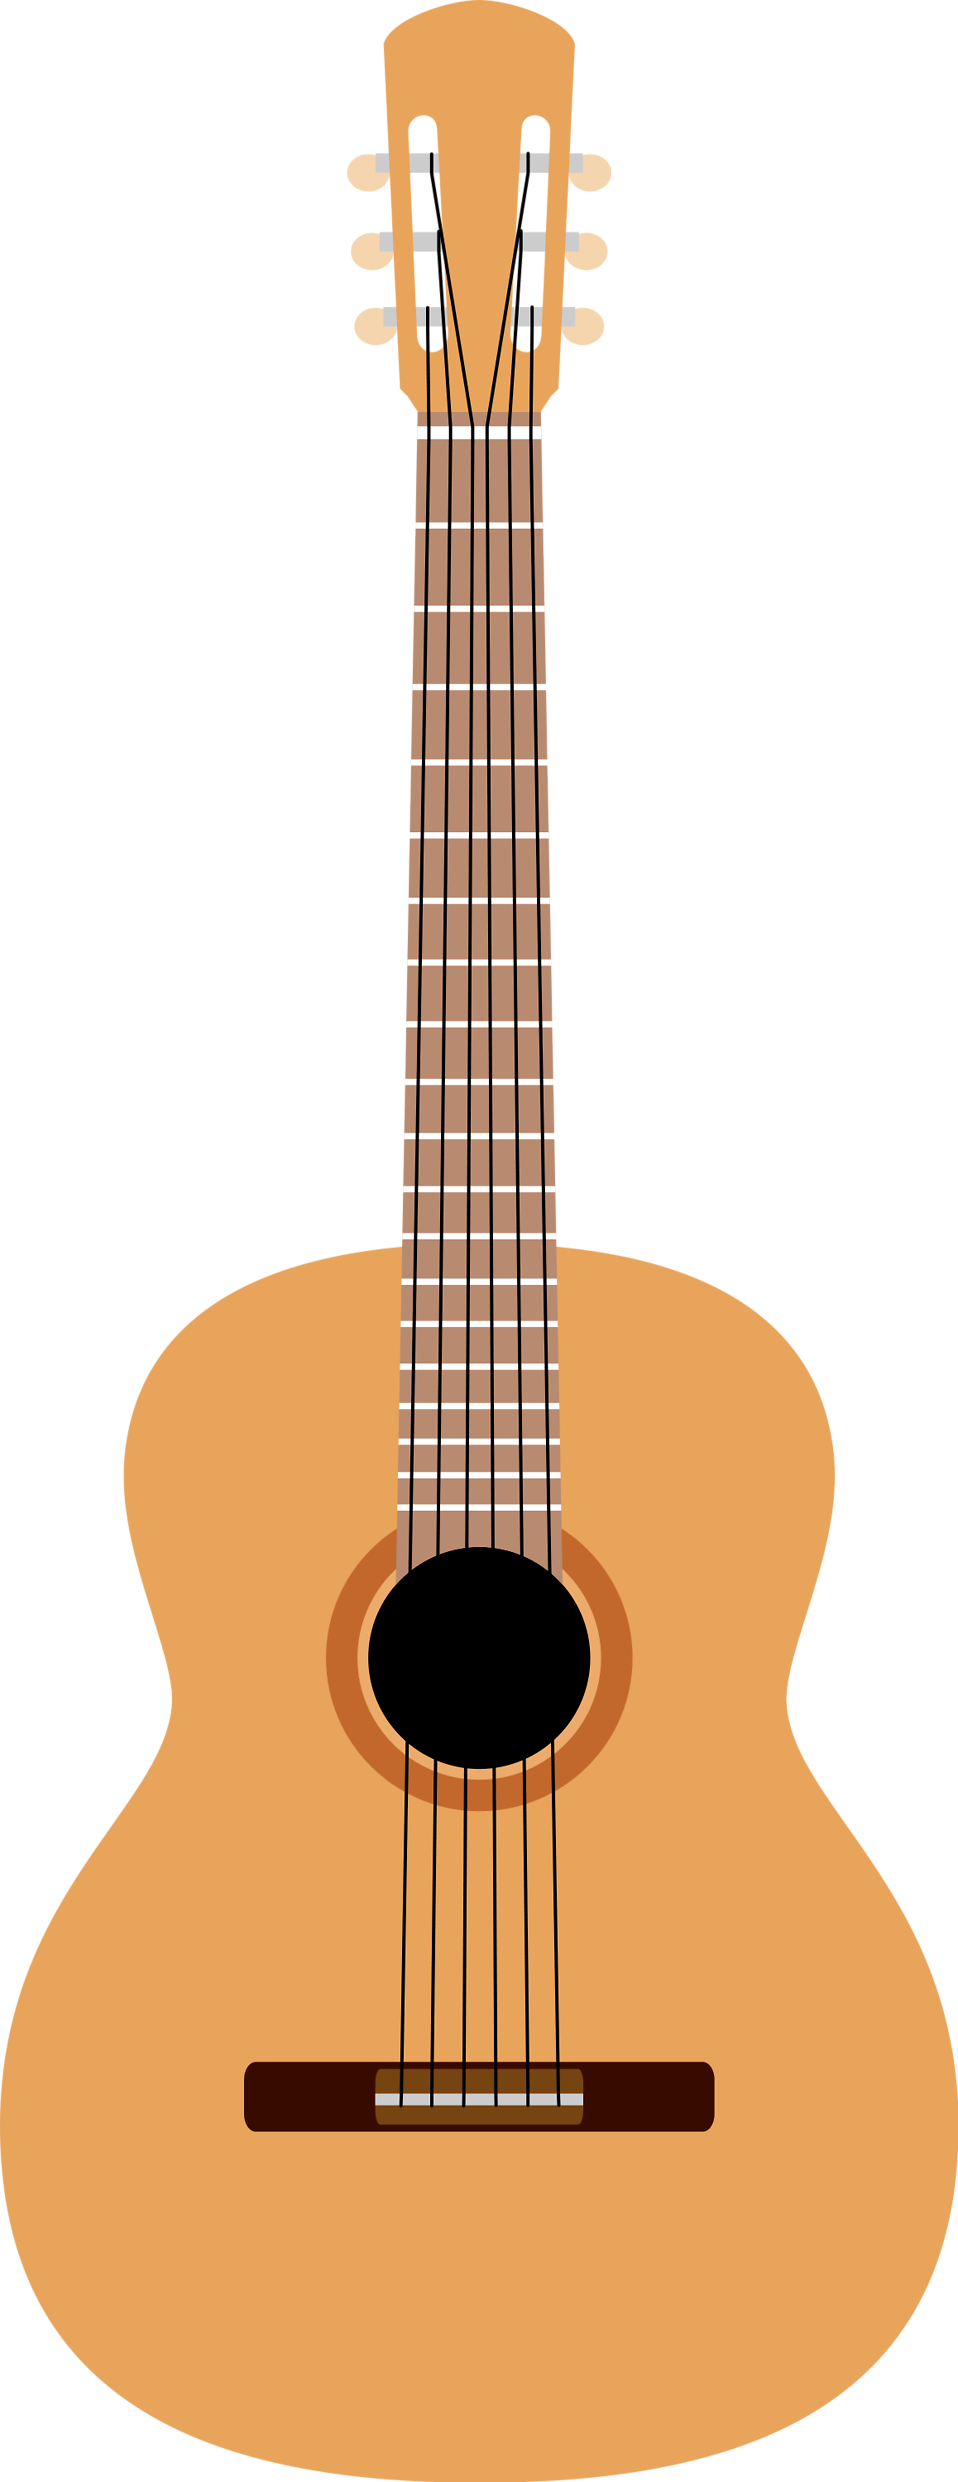 Guitar | Free Stock Photo | Illustration of an acoustic guitar ...